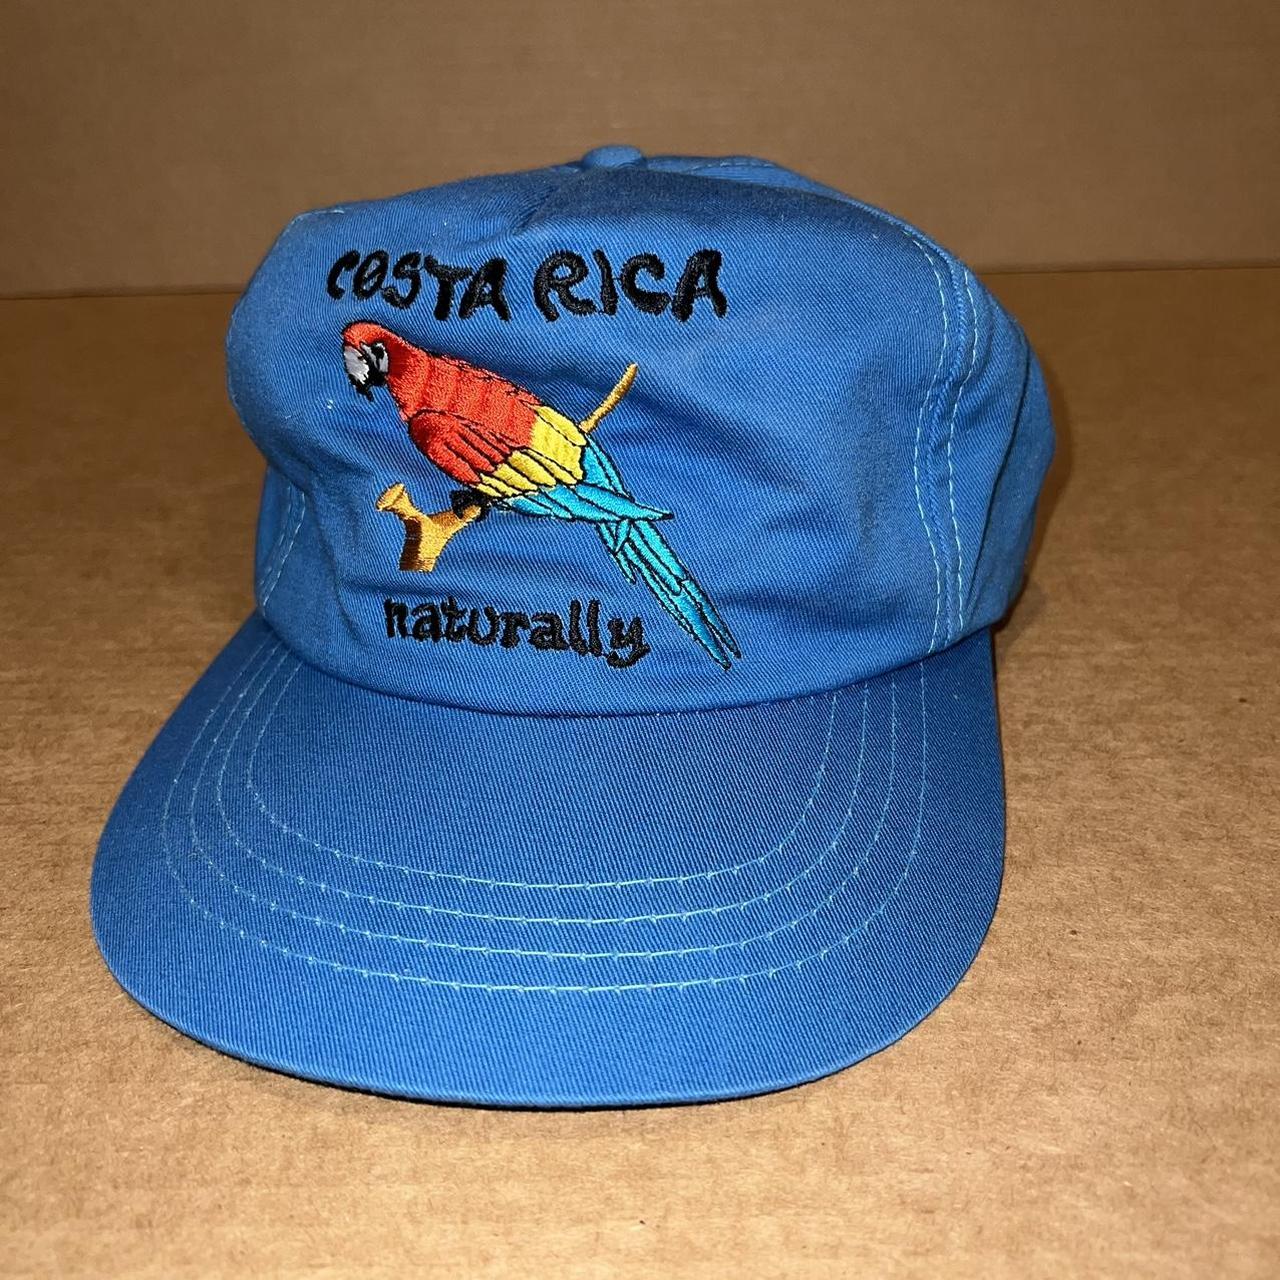 90s Costa Rica “naturally” hat. I'm really good - Depop